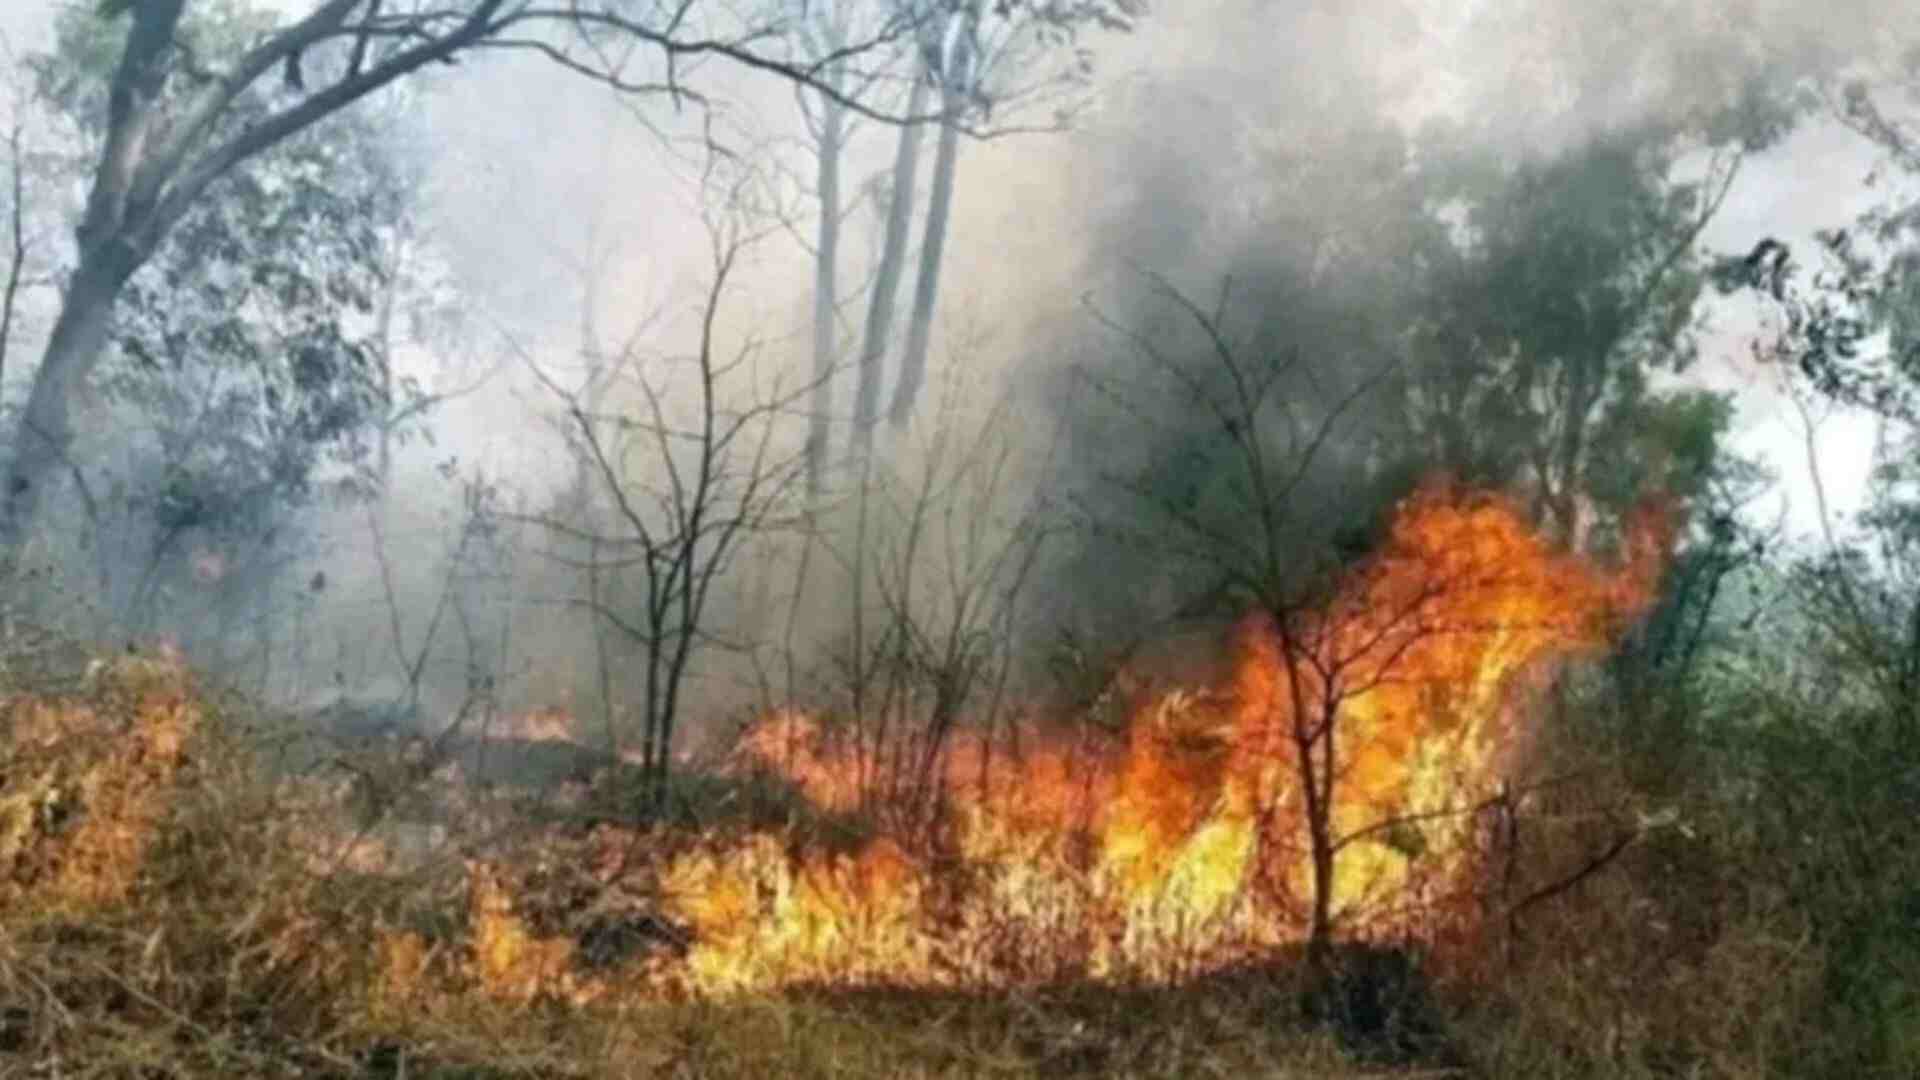 Uttarakhand: 4 Forest Department Workers Dead While Controlling Fire In Almora